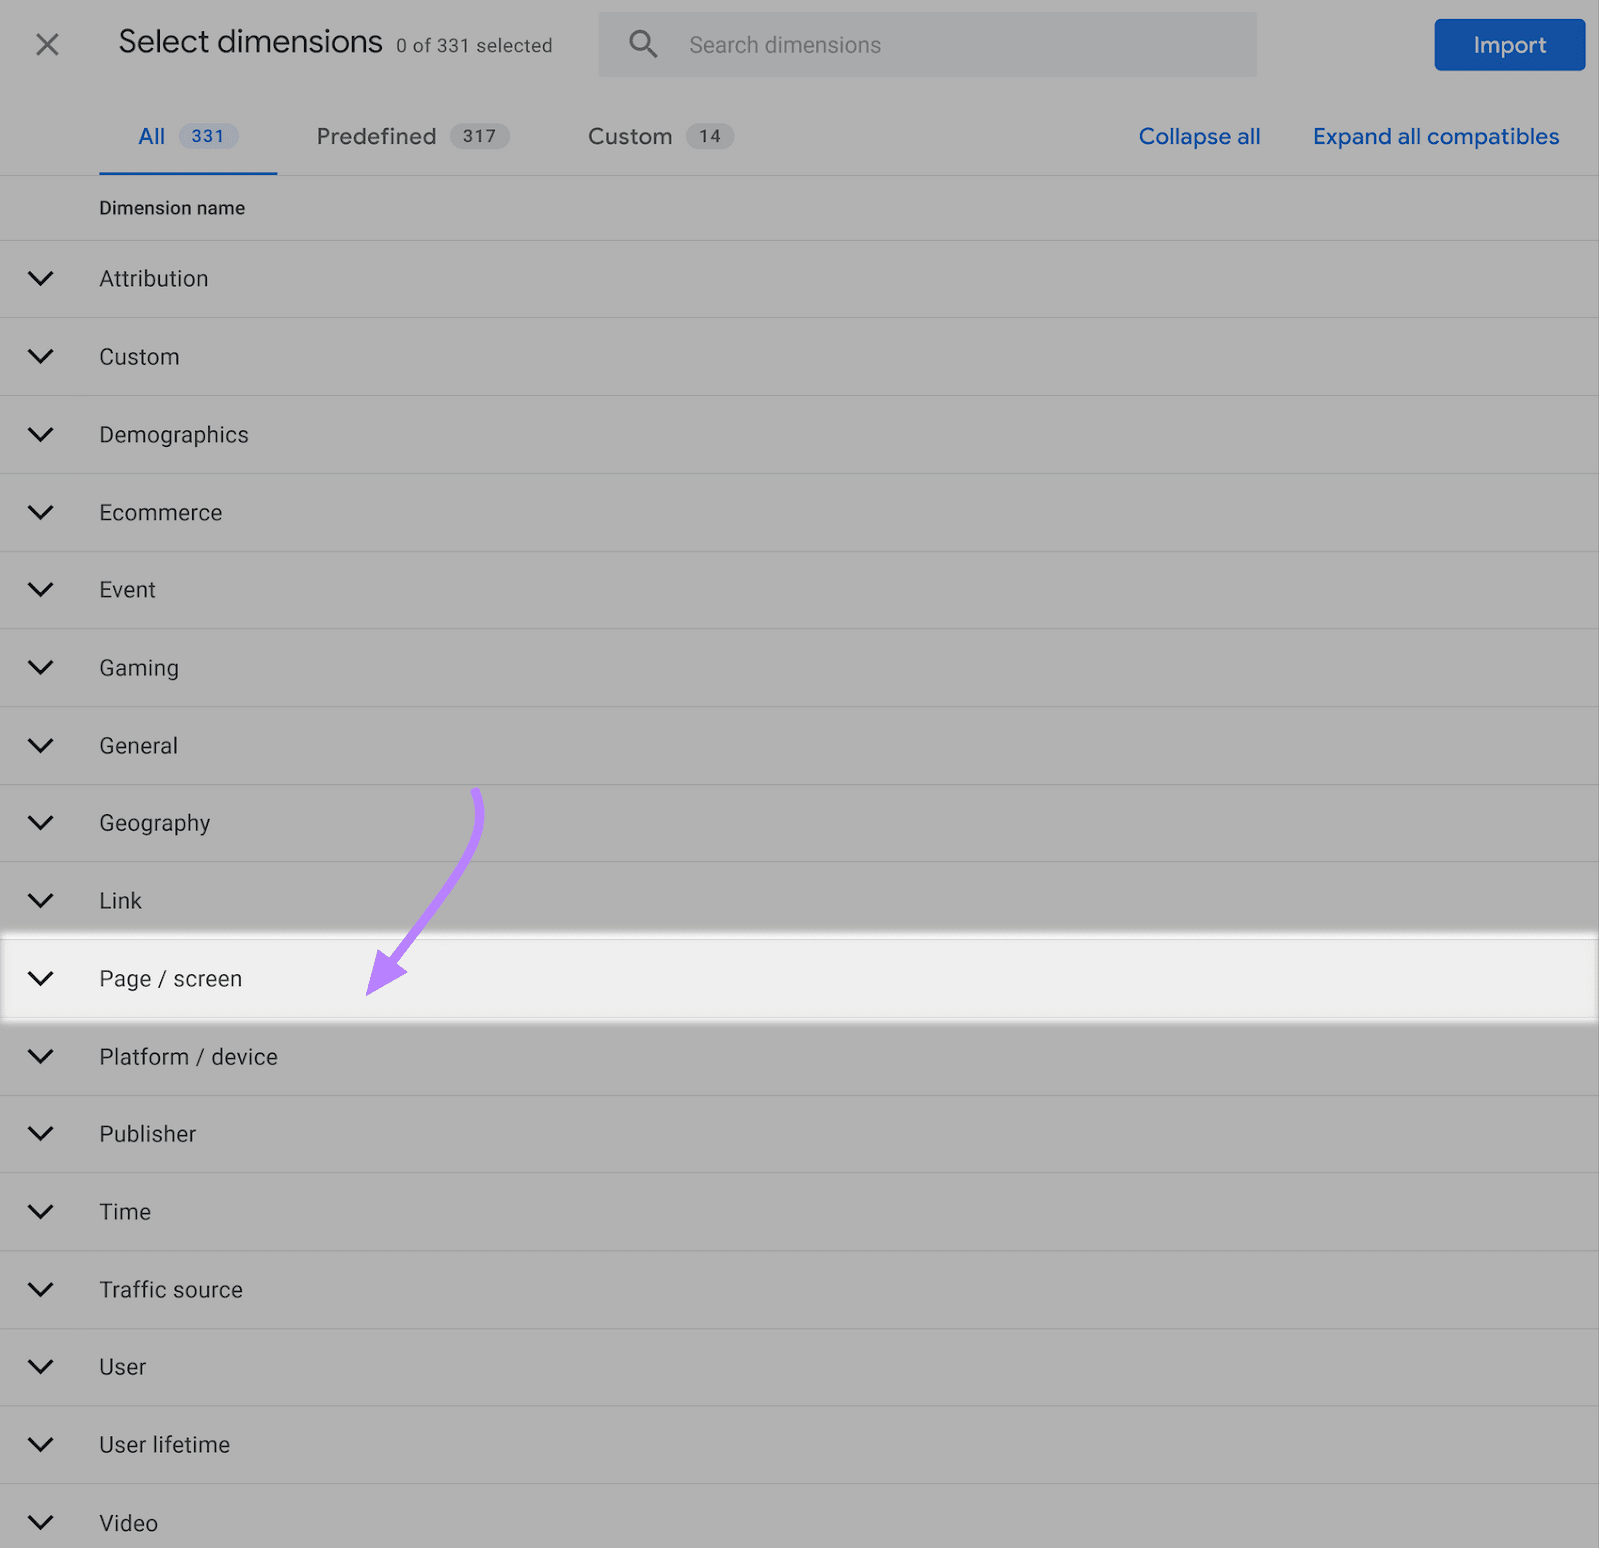 “Page / screen” option selected under "Select dimensions" drop-down menu